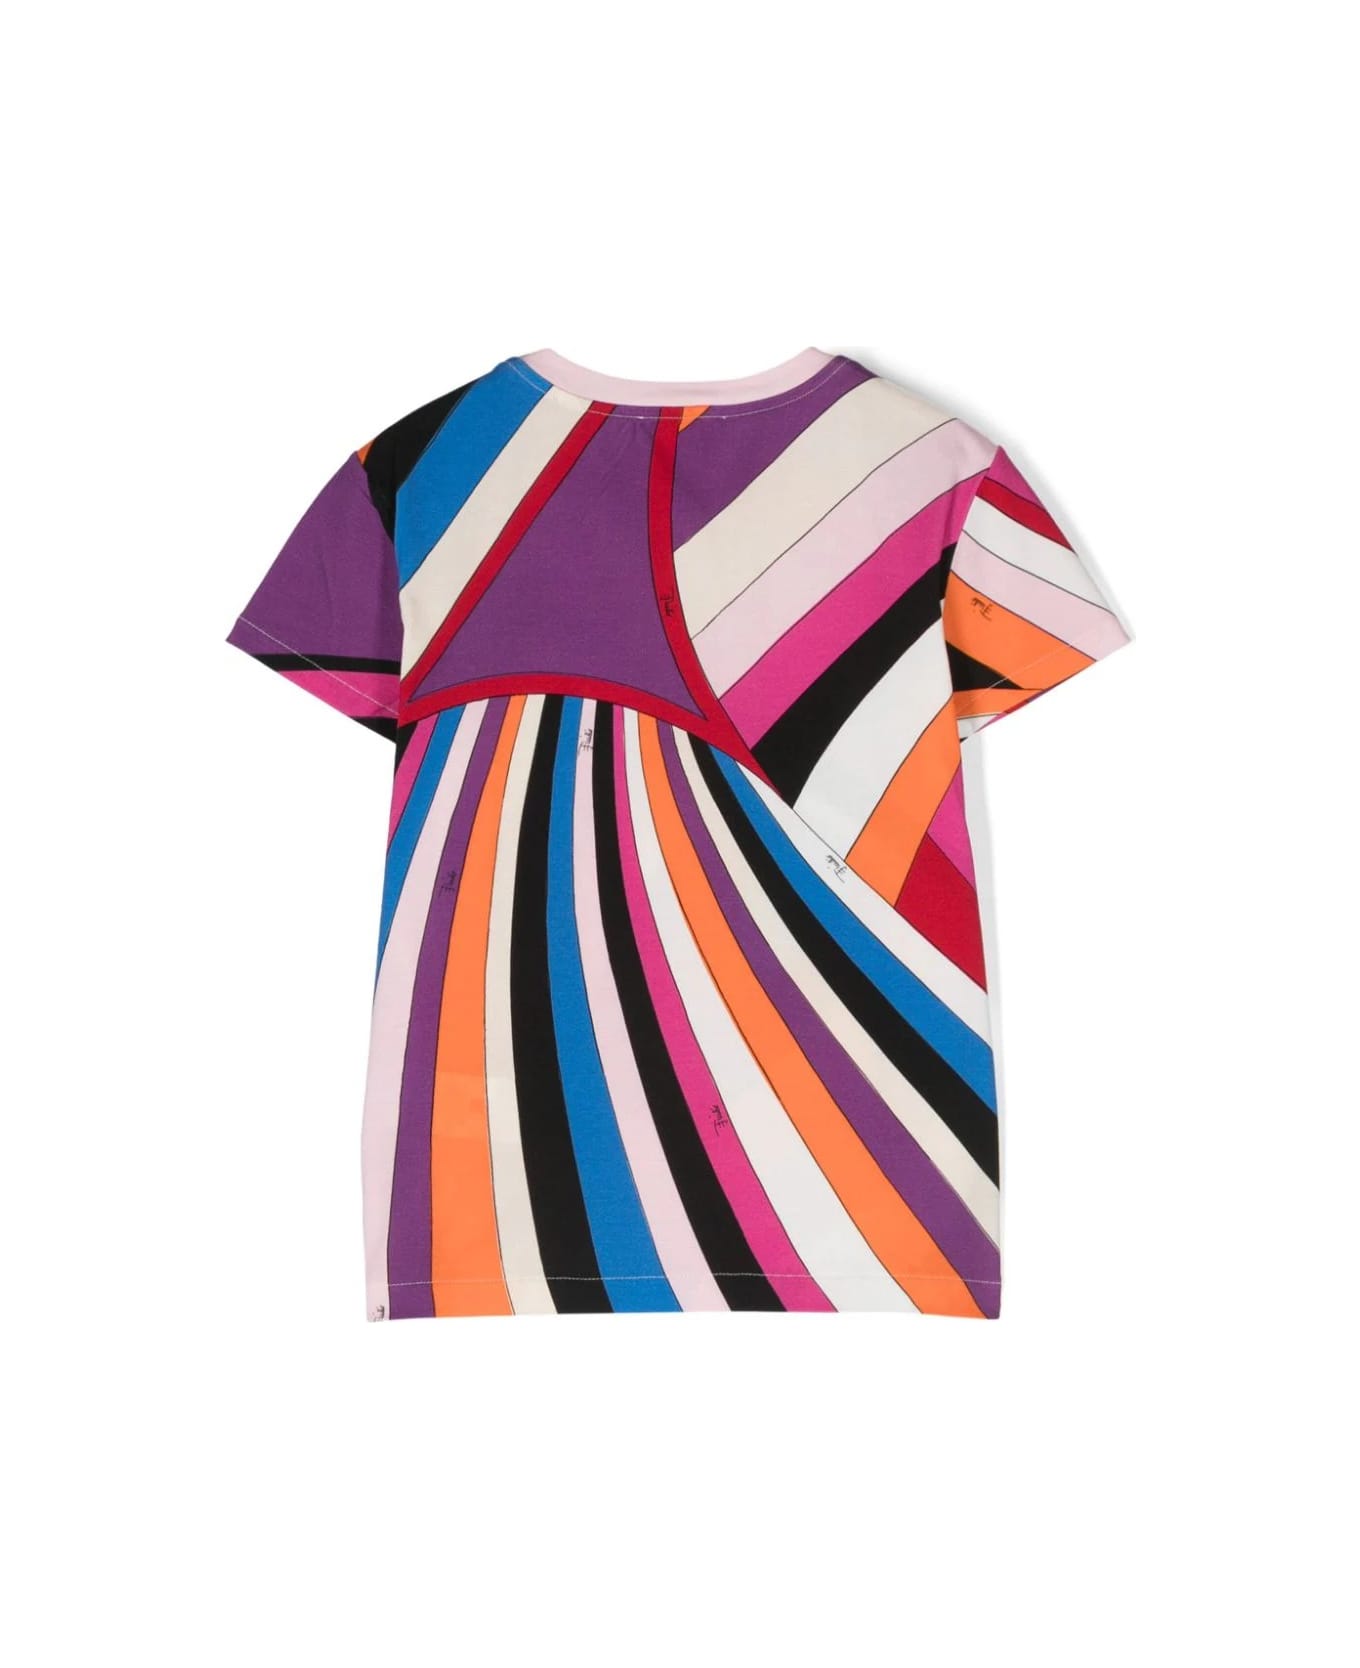 Pucci T-shirt With Fish Motif And Iris Print In Purple/multicolour - Purple